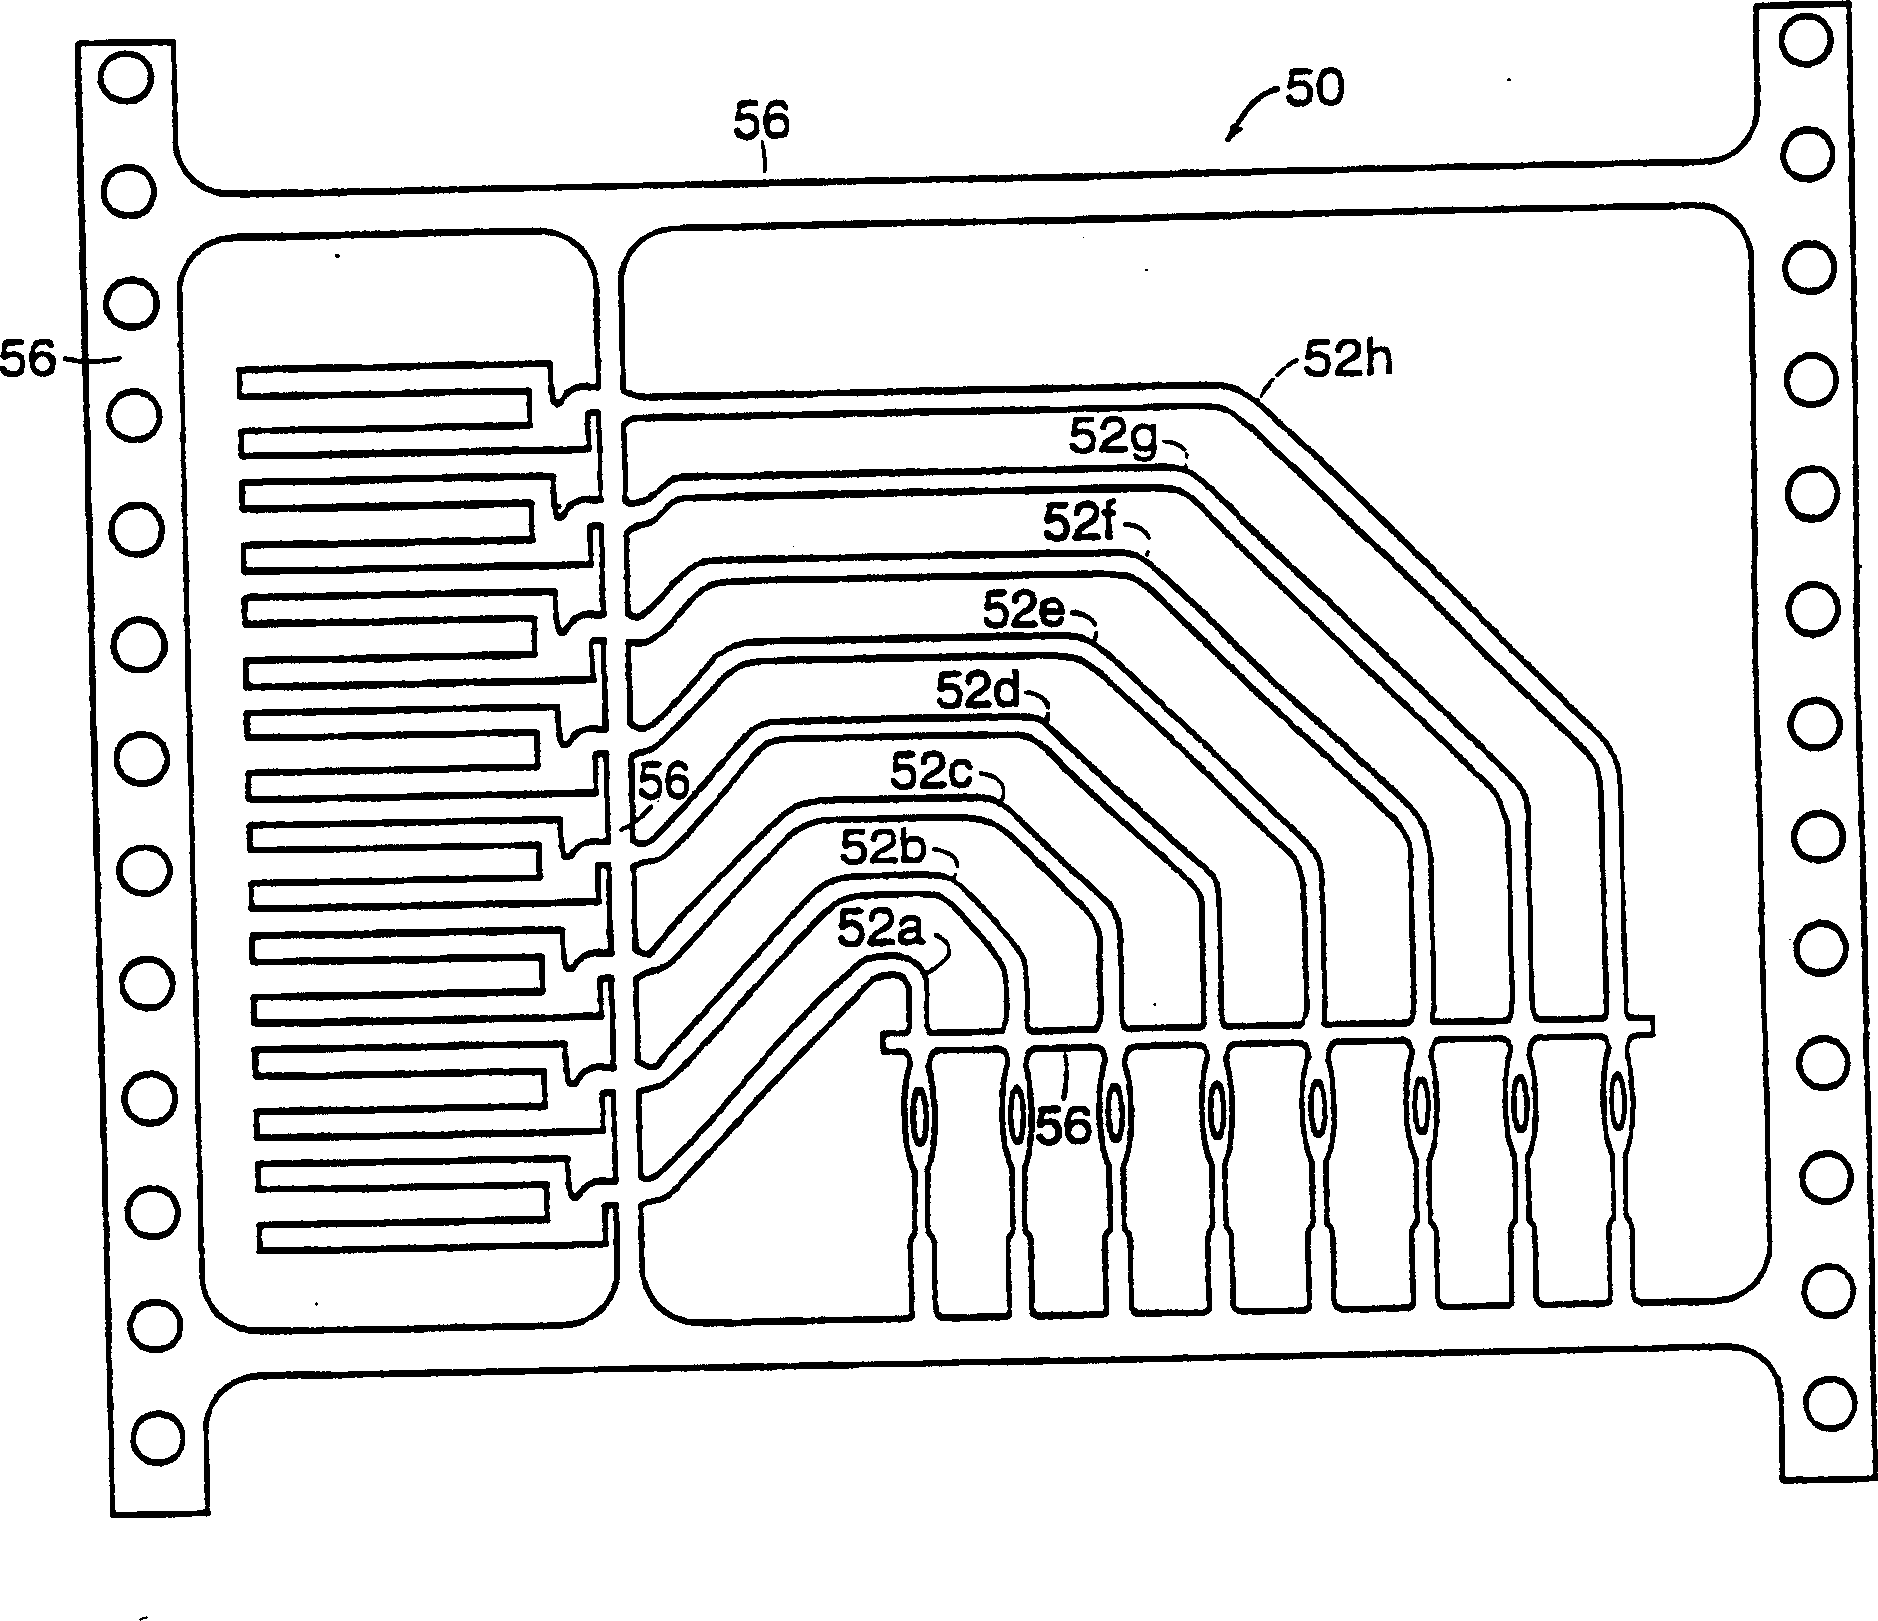 Differential signal electrical connectors